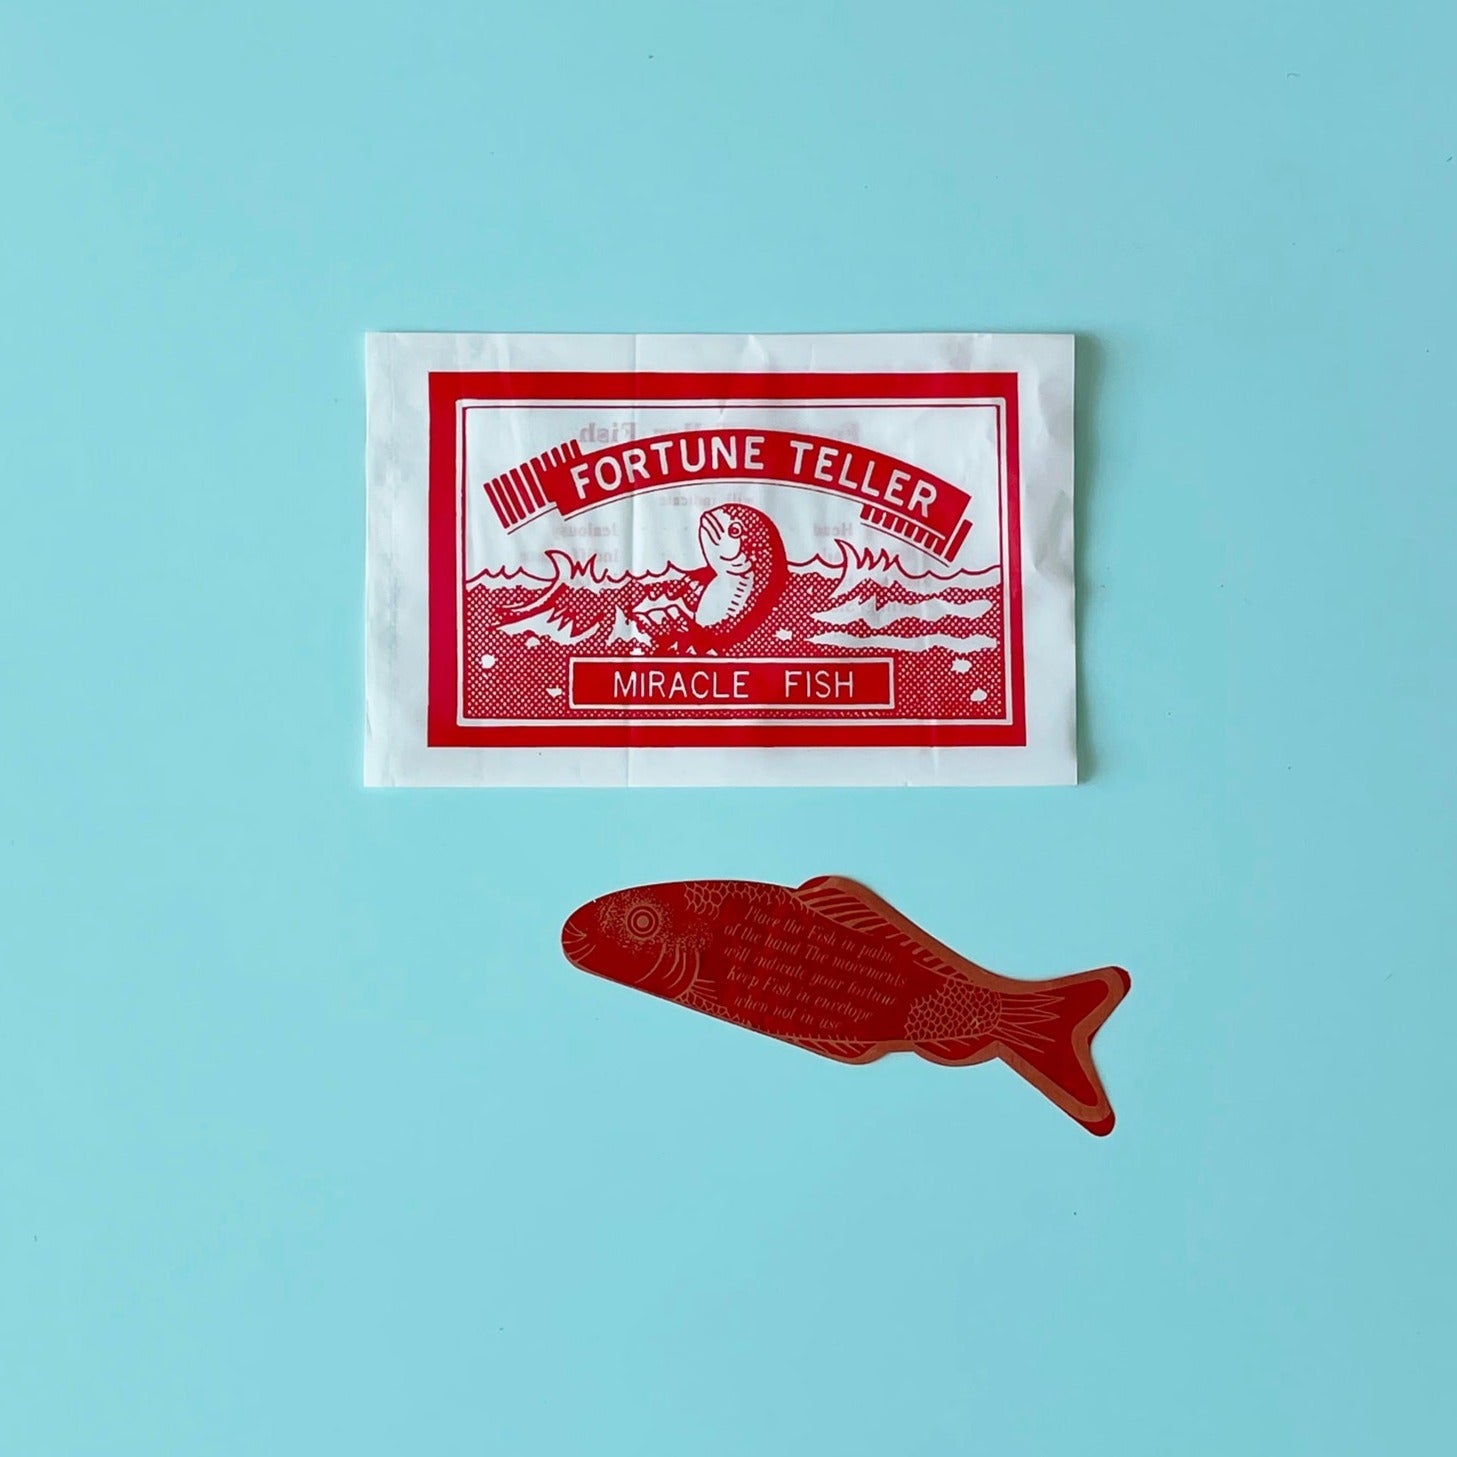 288 Fortune Telling Fish - Miracle Teller Palm Reading Party Favors (24  dozen)